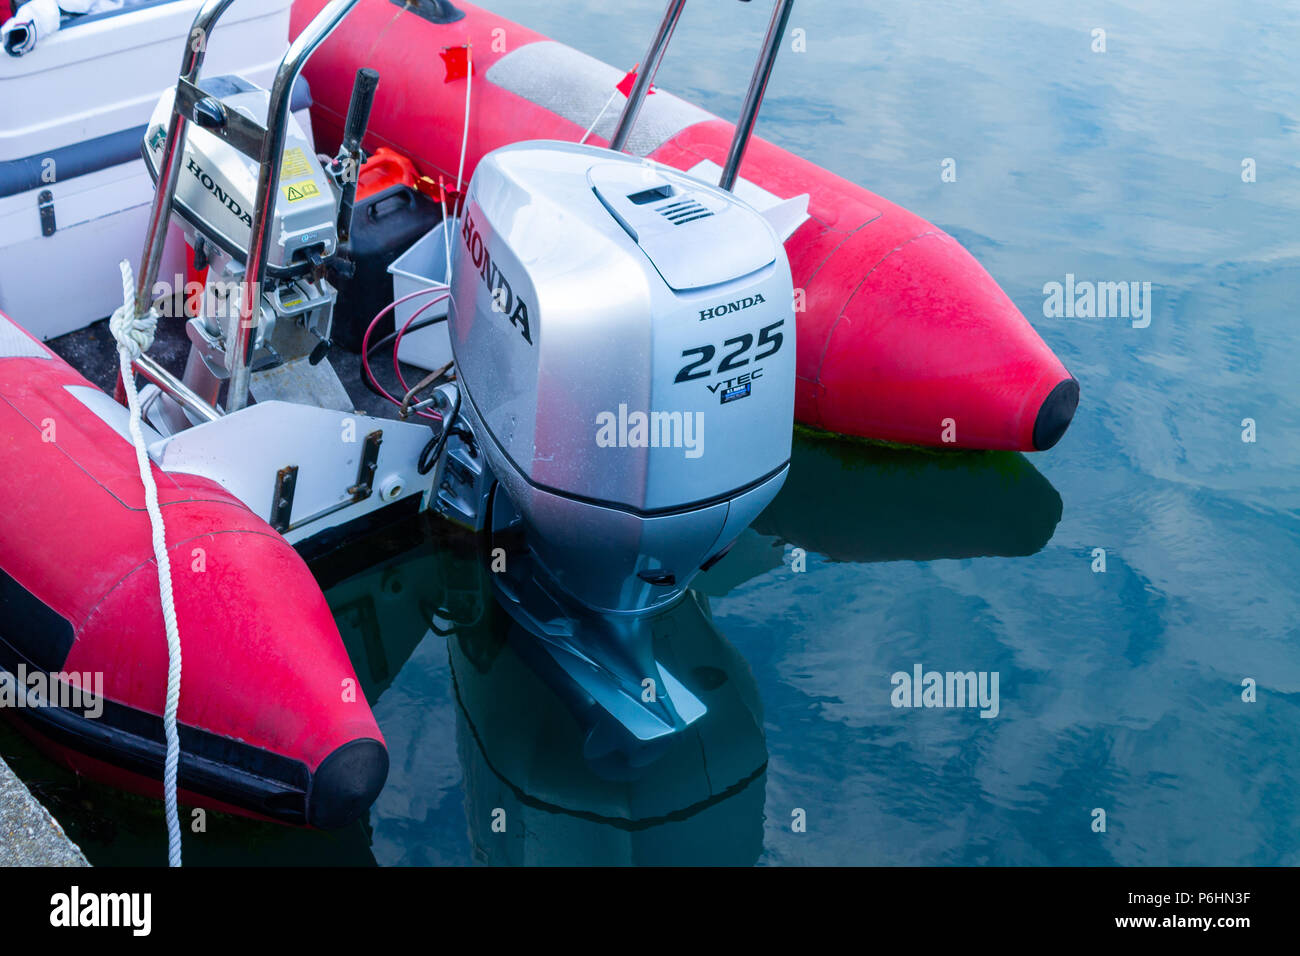 honda outboard engine mounted on the stern of a rigid inflatable boat. Stock Photo